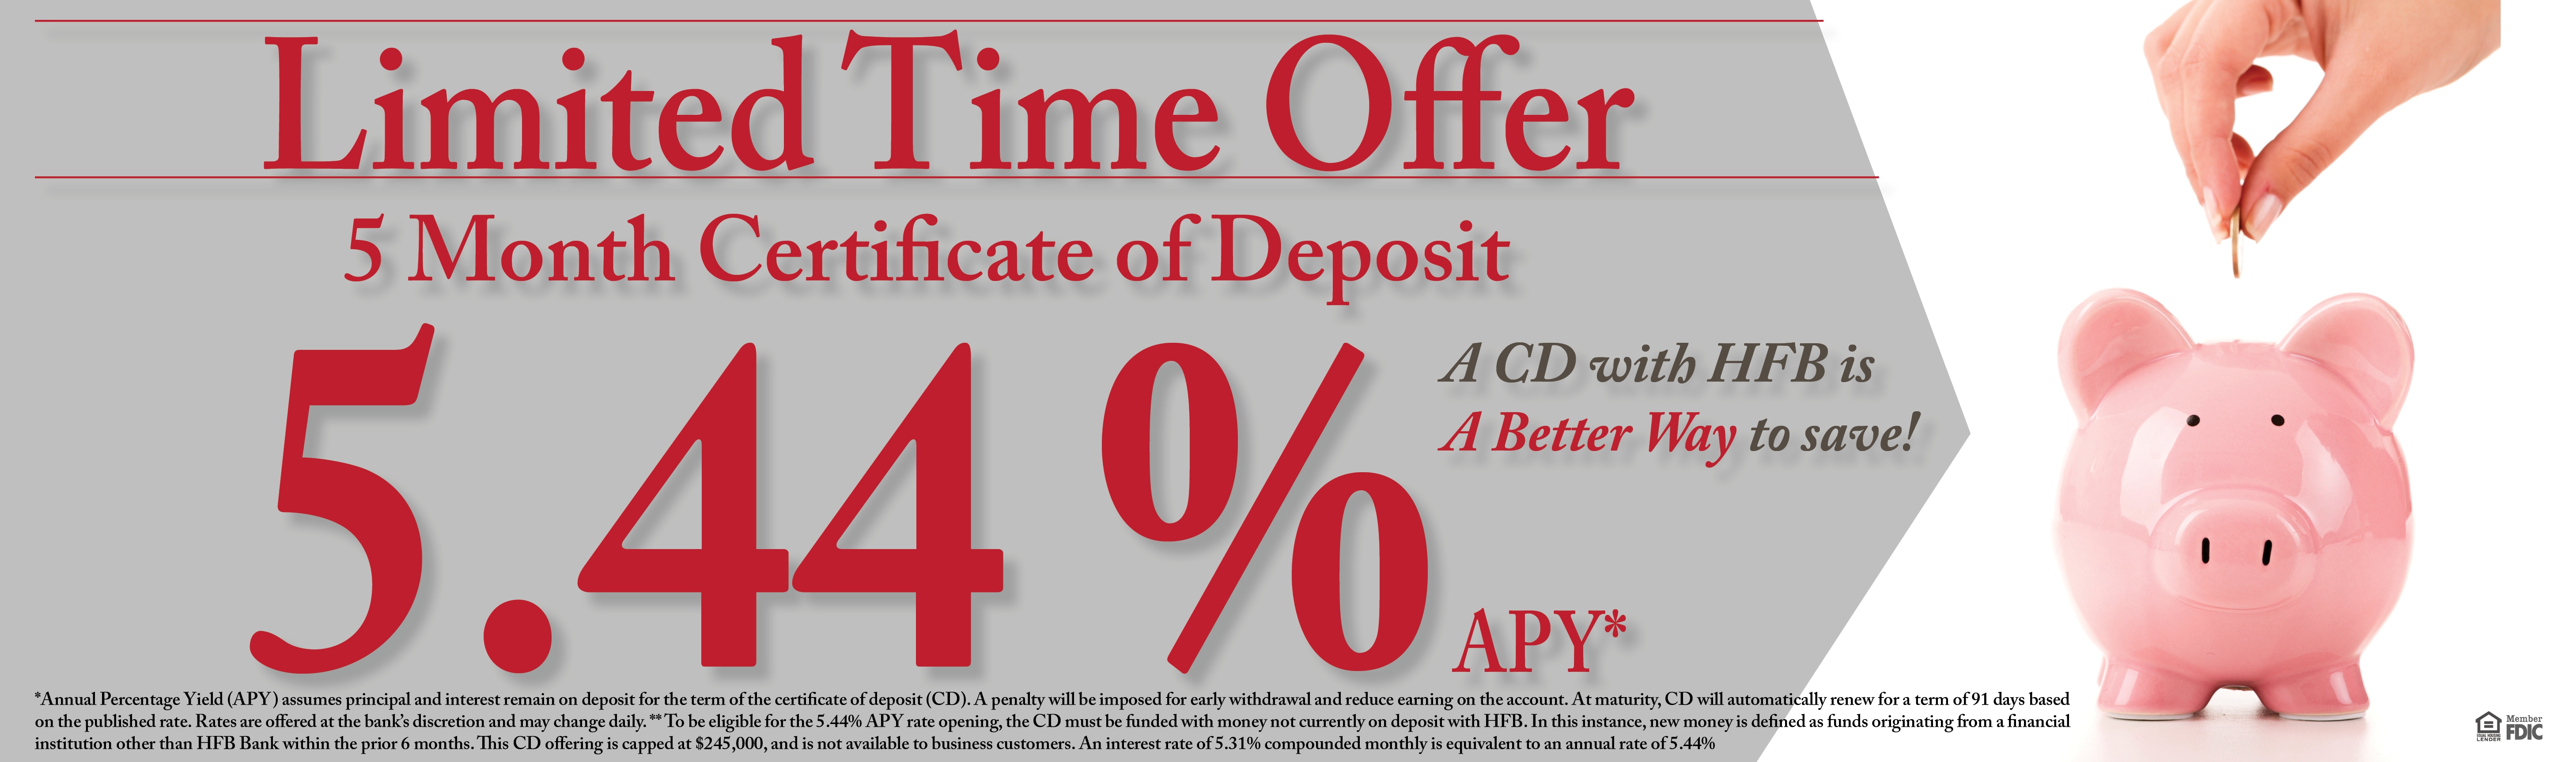 Limited Offer CD Rate